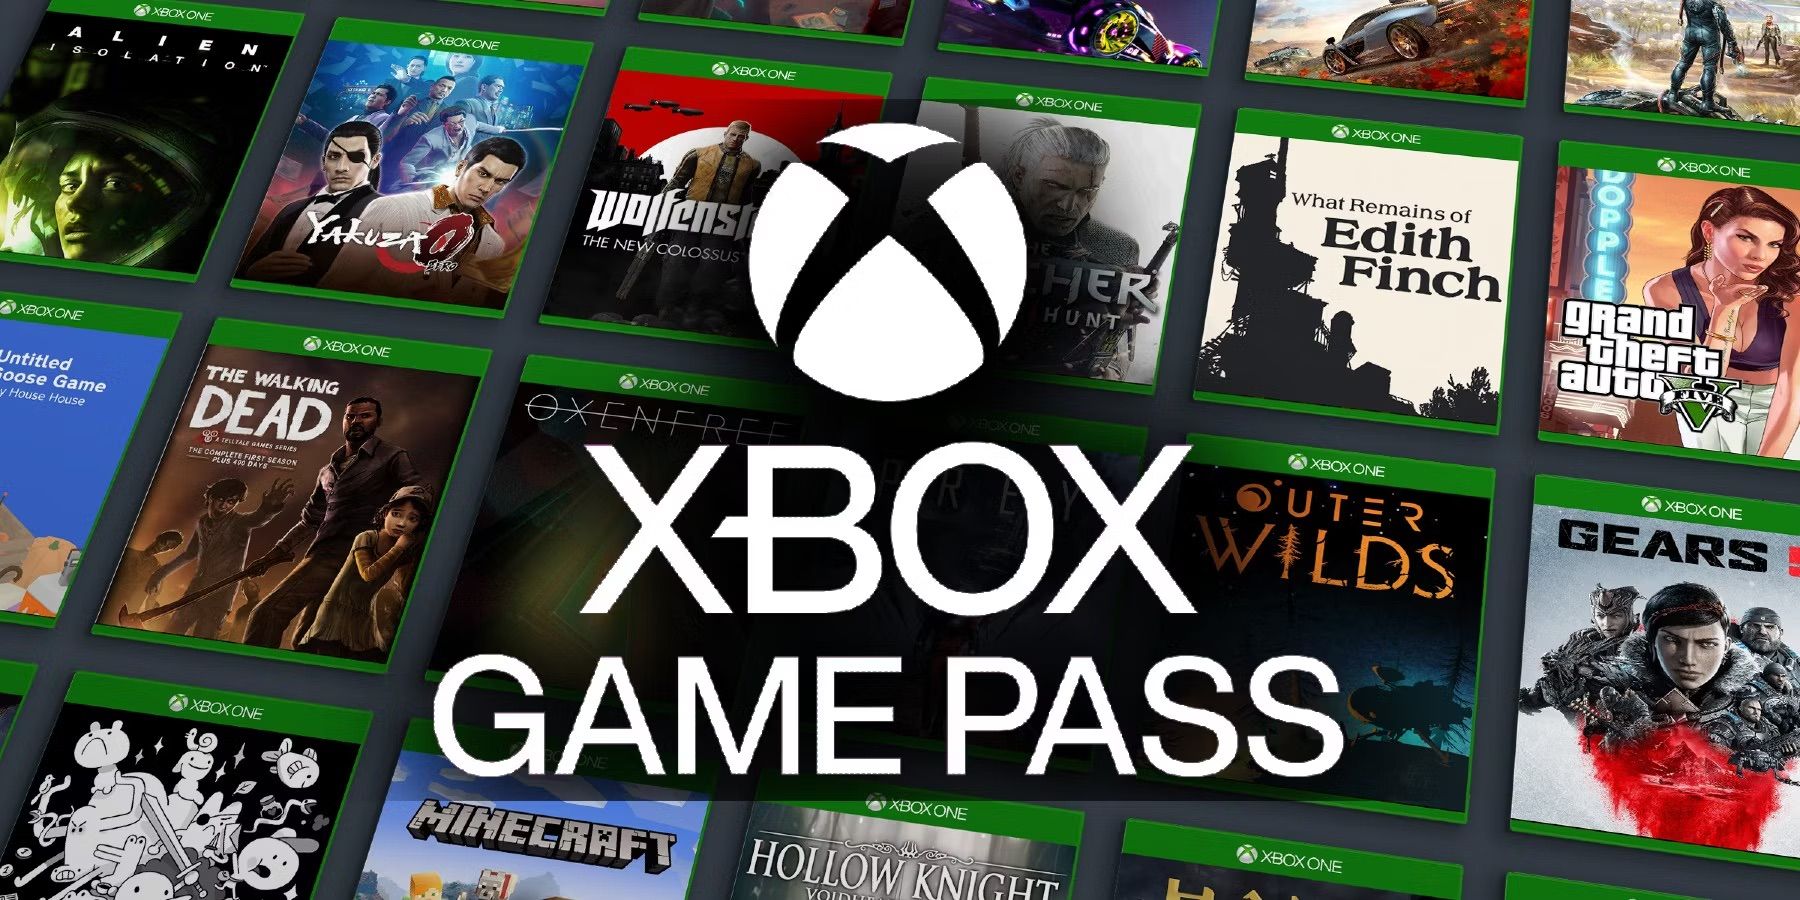 Microsoft Addresses Xbox Game Pass Price Increase Concerns